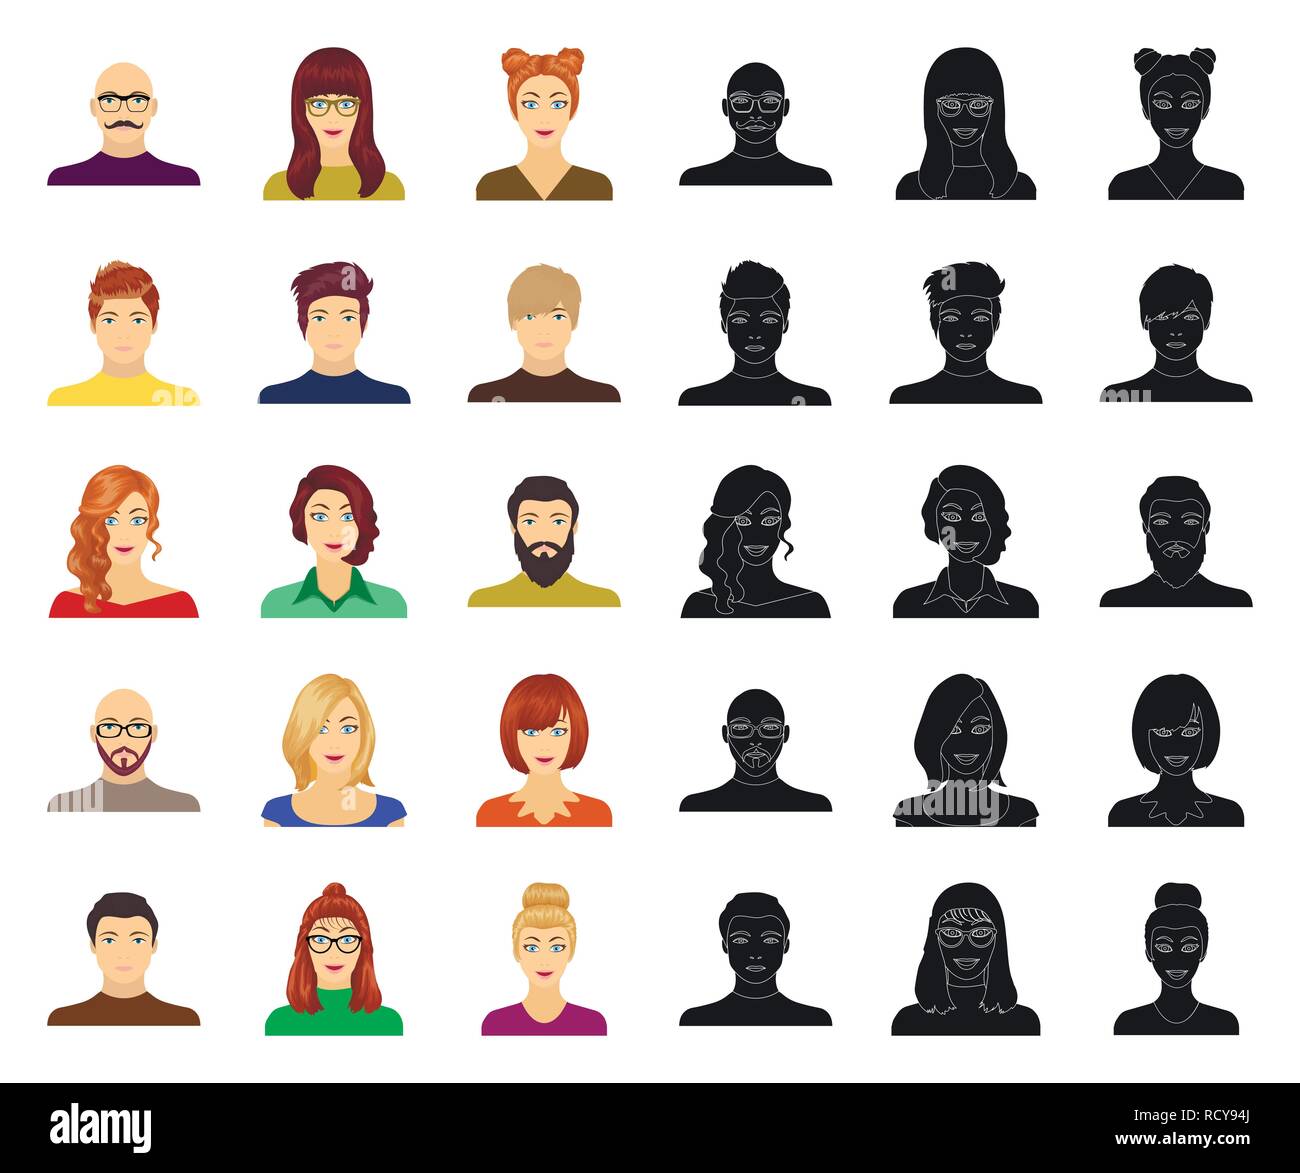 appearance,avatar,bald,beard,blonde,boy ,brunette,bust,cartoon,black,coiffure,collection,curl,design,expression,face,faces,facial,fashion,fringe, girl,glasses,guy,hair,haircut,hairdo,hairstyle ,head,icon,illustration,image,isolated,logo,male,man,mustache ...